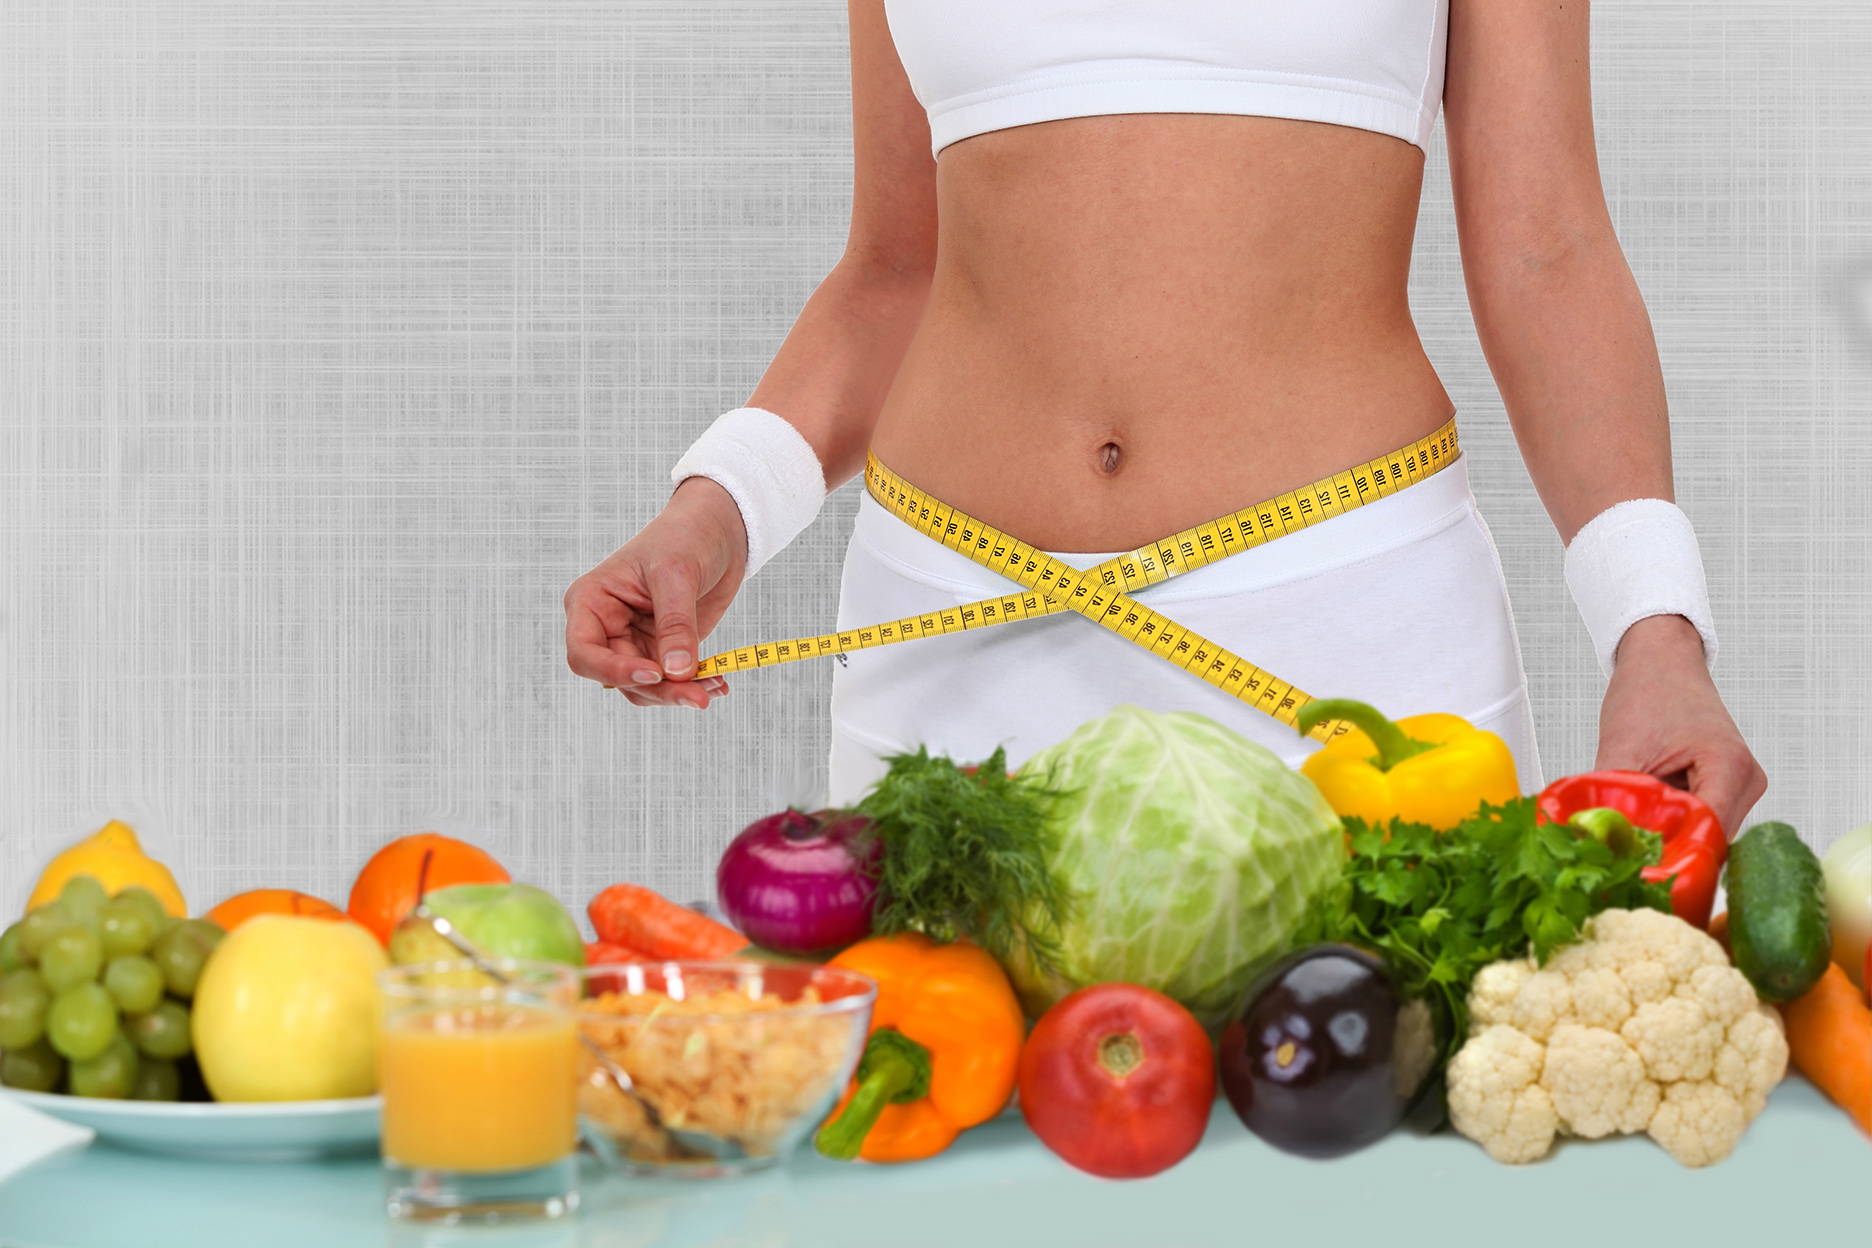 How to choose the best weight diet for you